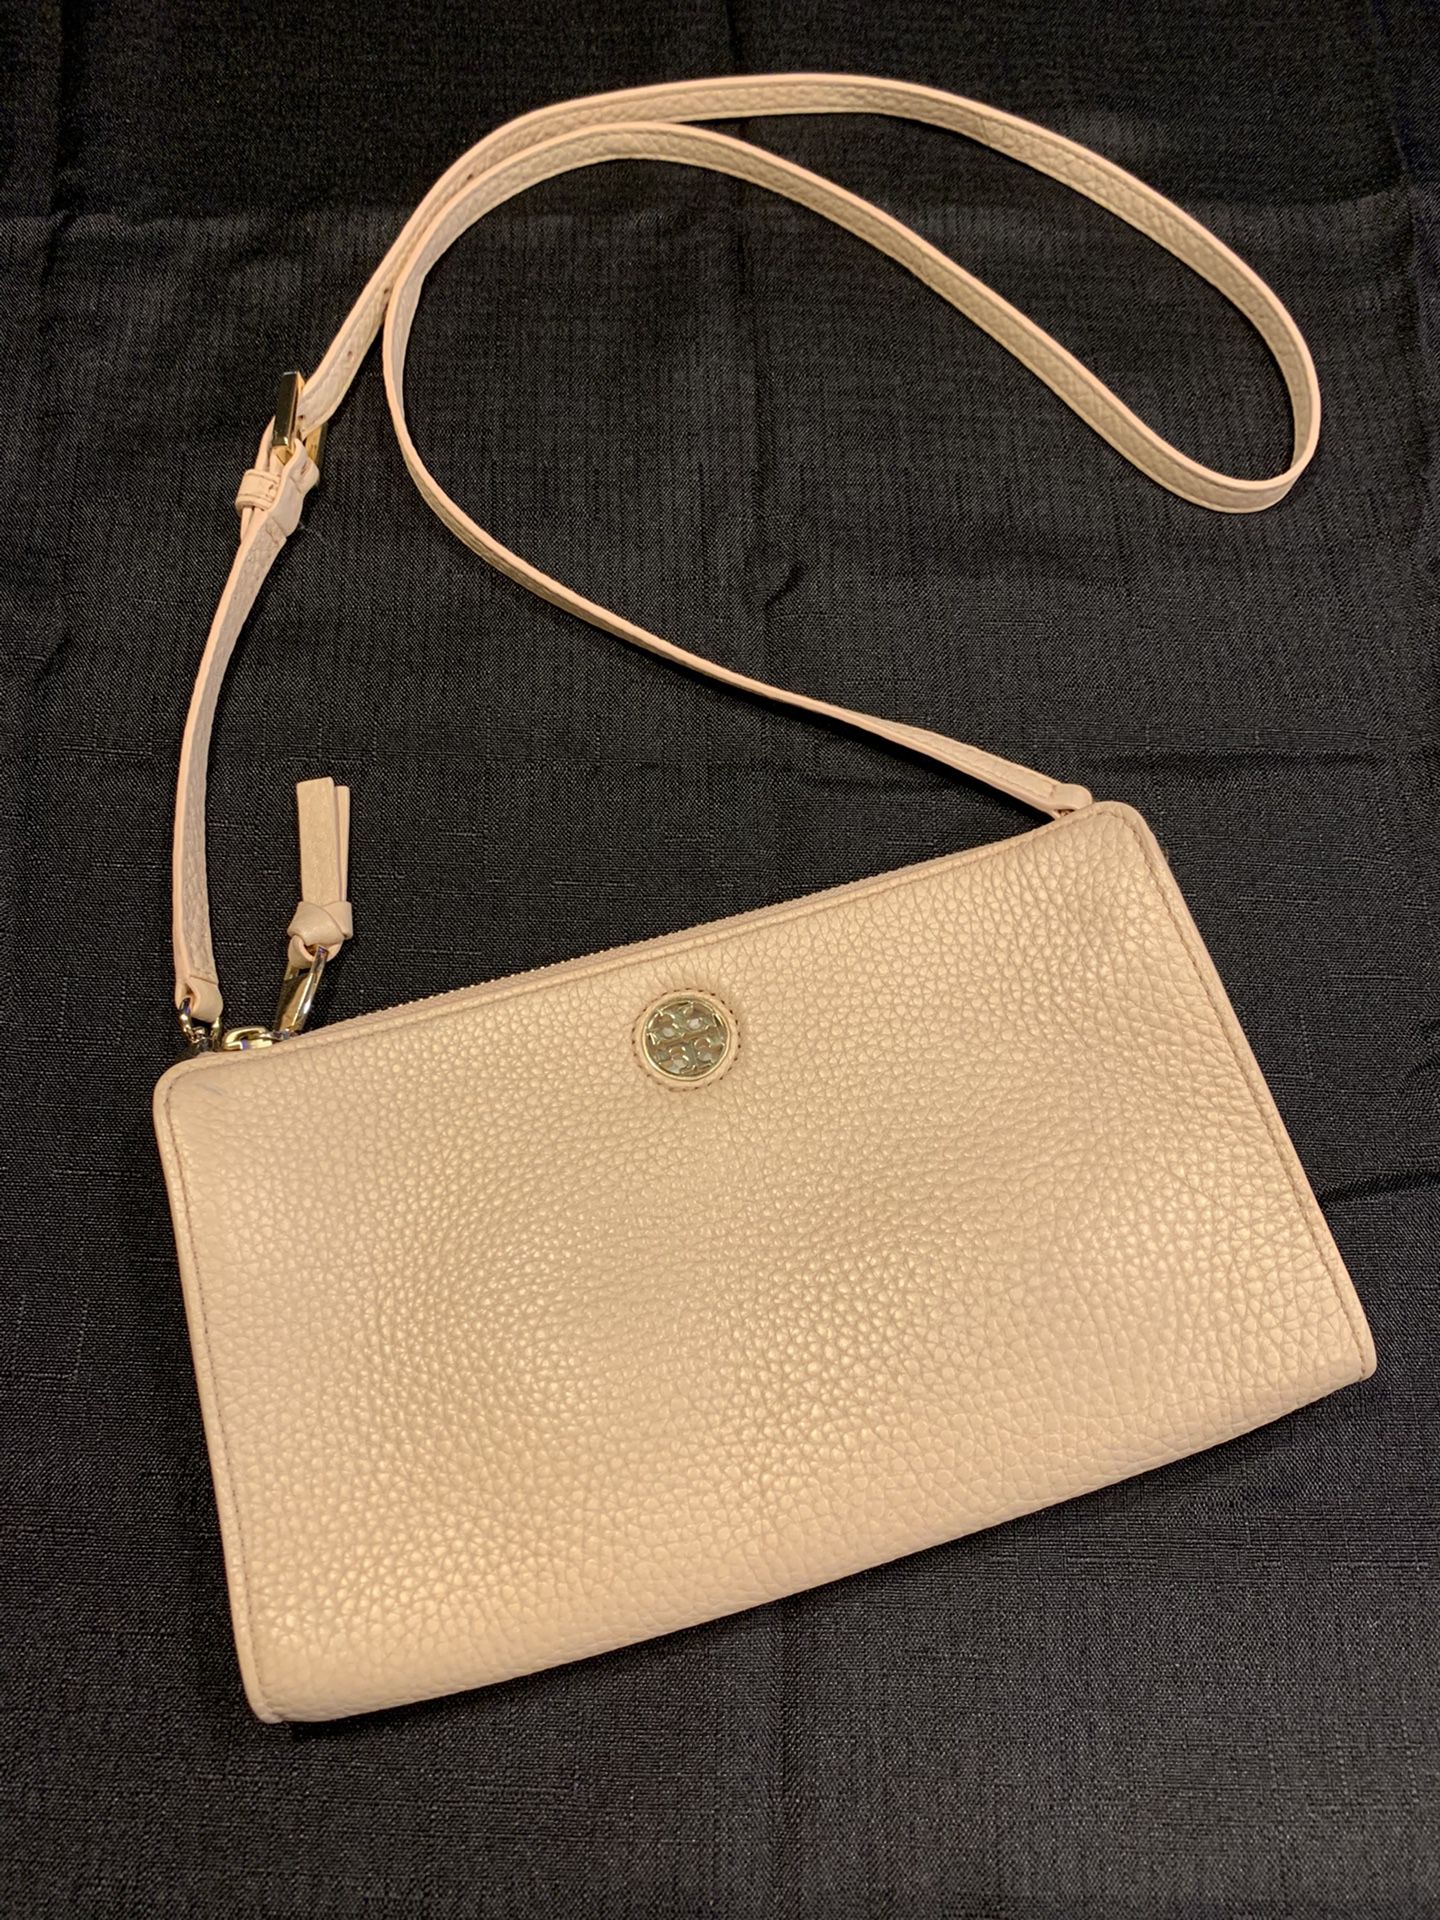 Tory Burch Crossbody Purse for Sale in Chino Hills, CA - OfferUp